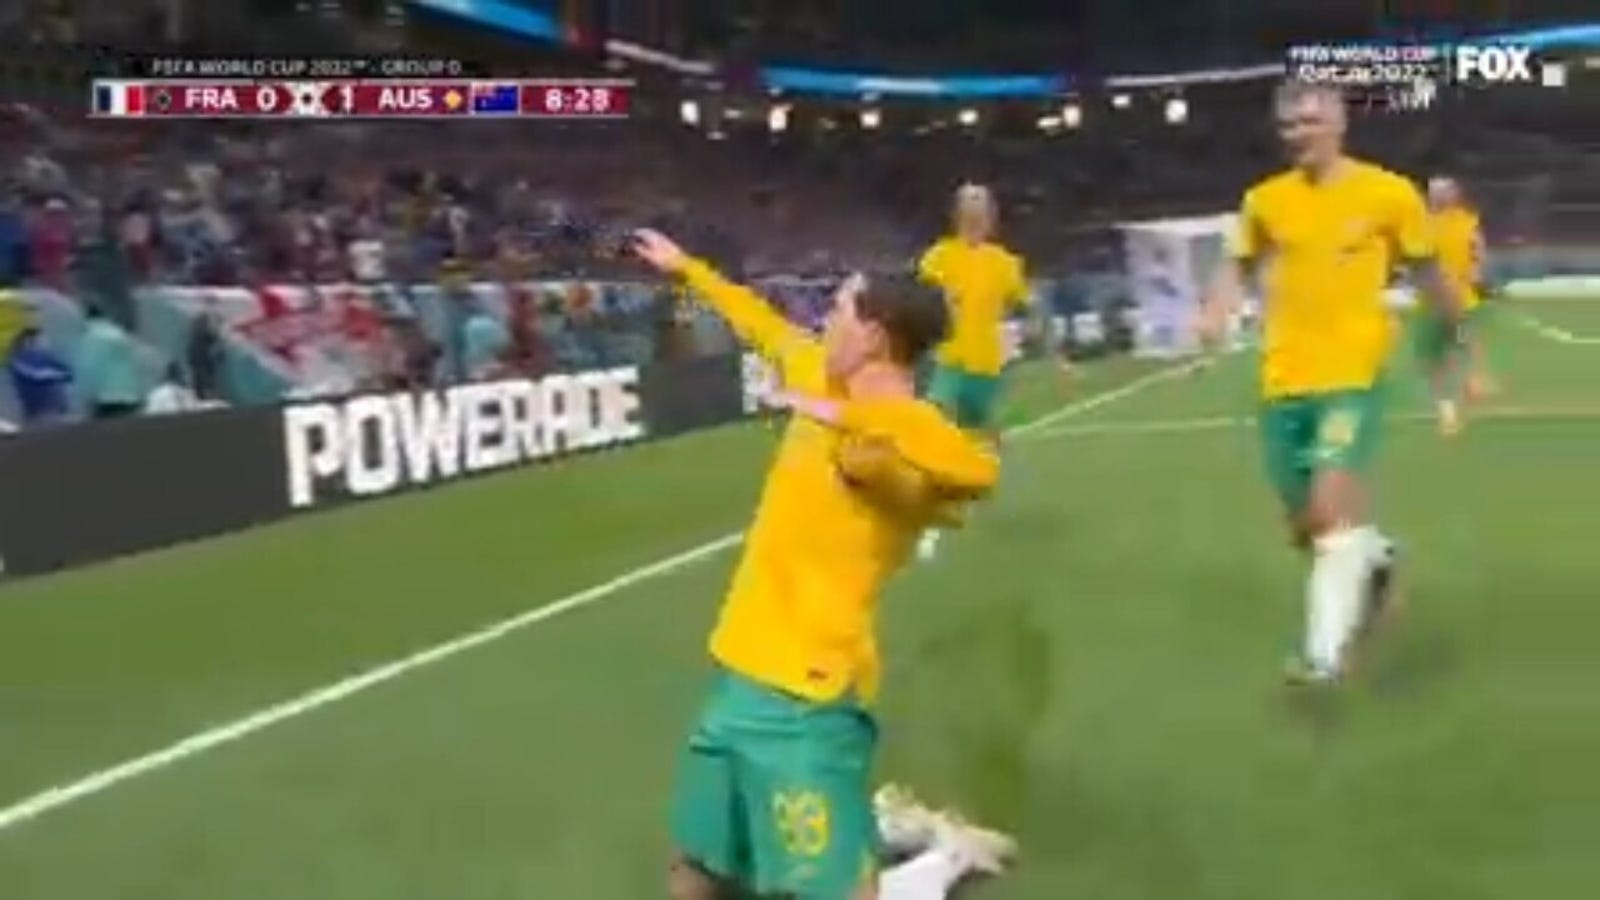 Craig Goodwin made the first strike in the 9th minute and Australia took a 1-0 lead over France 